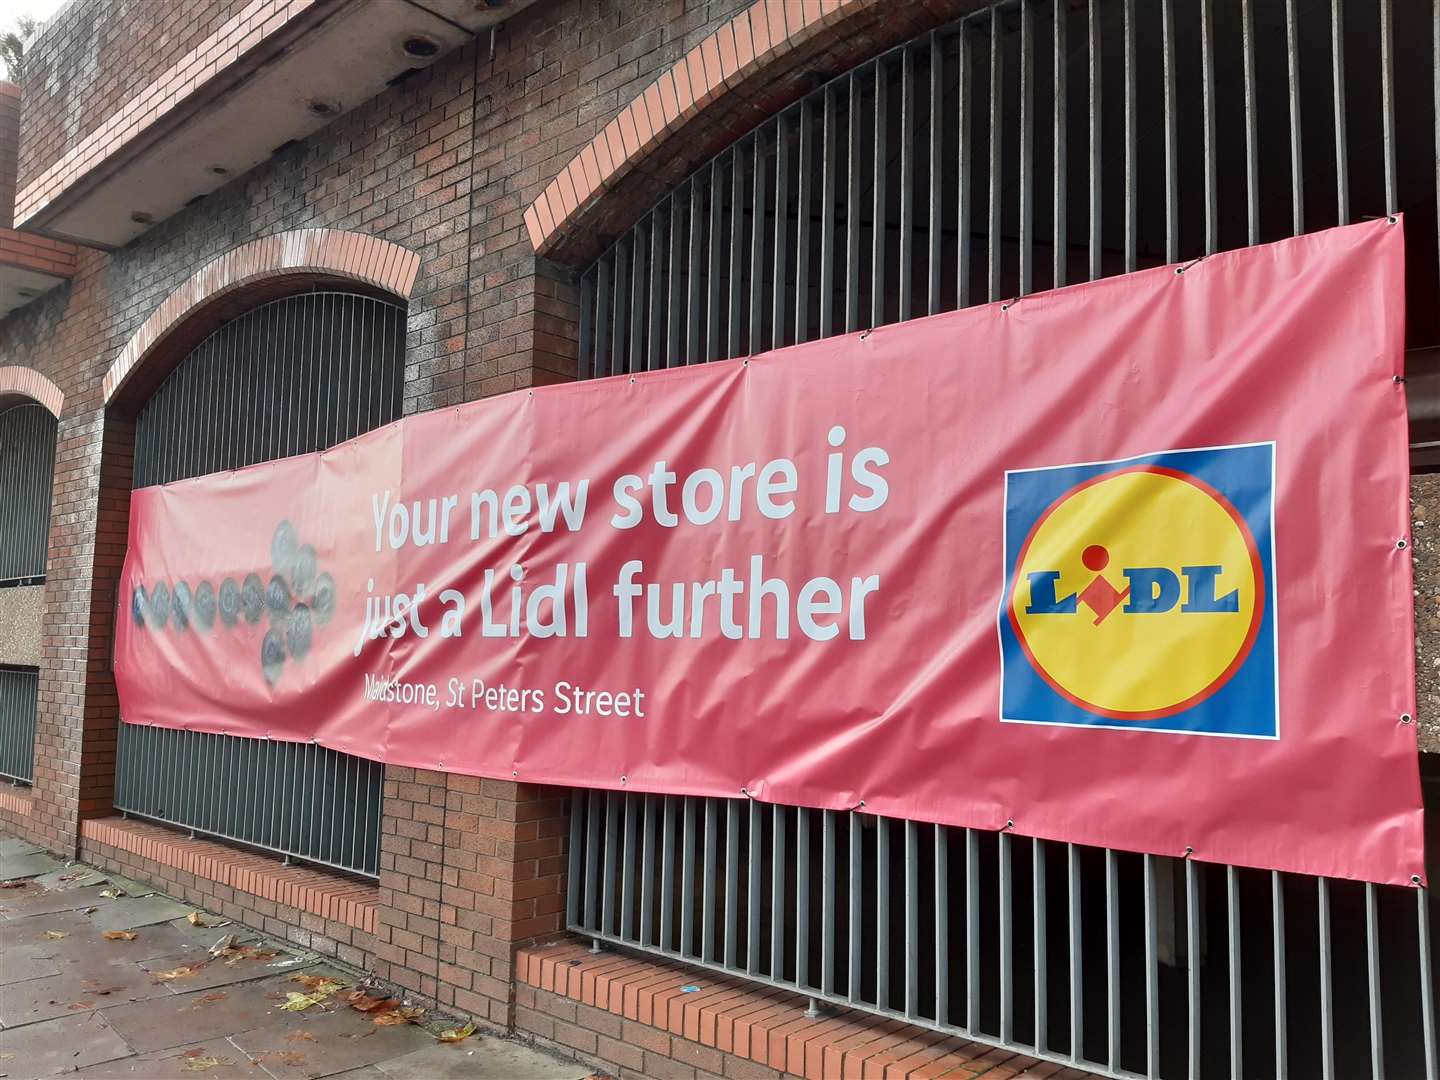 A sign has been put up outside the Broadway, directing customers to the new store